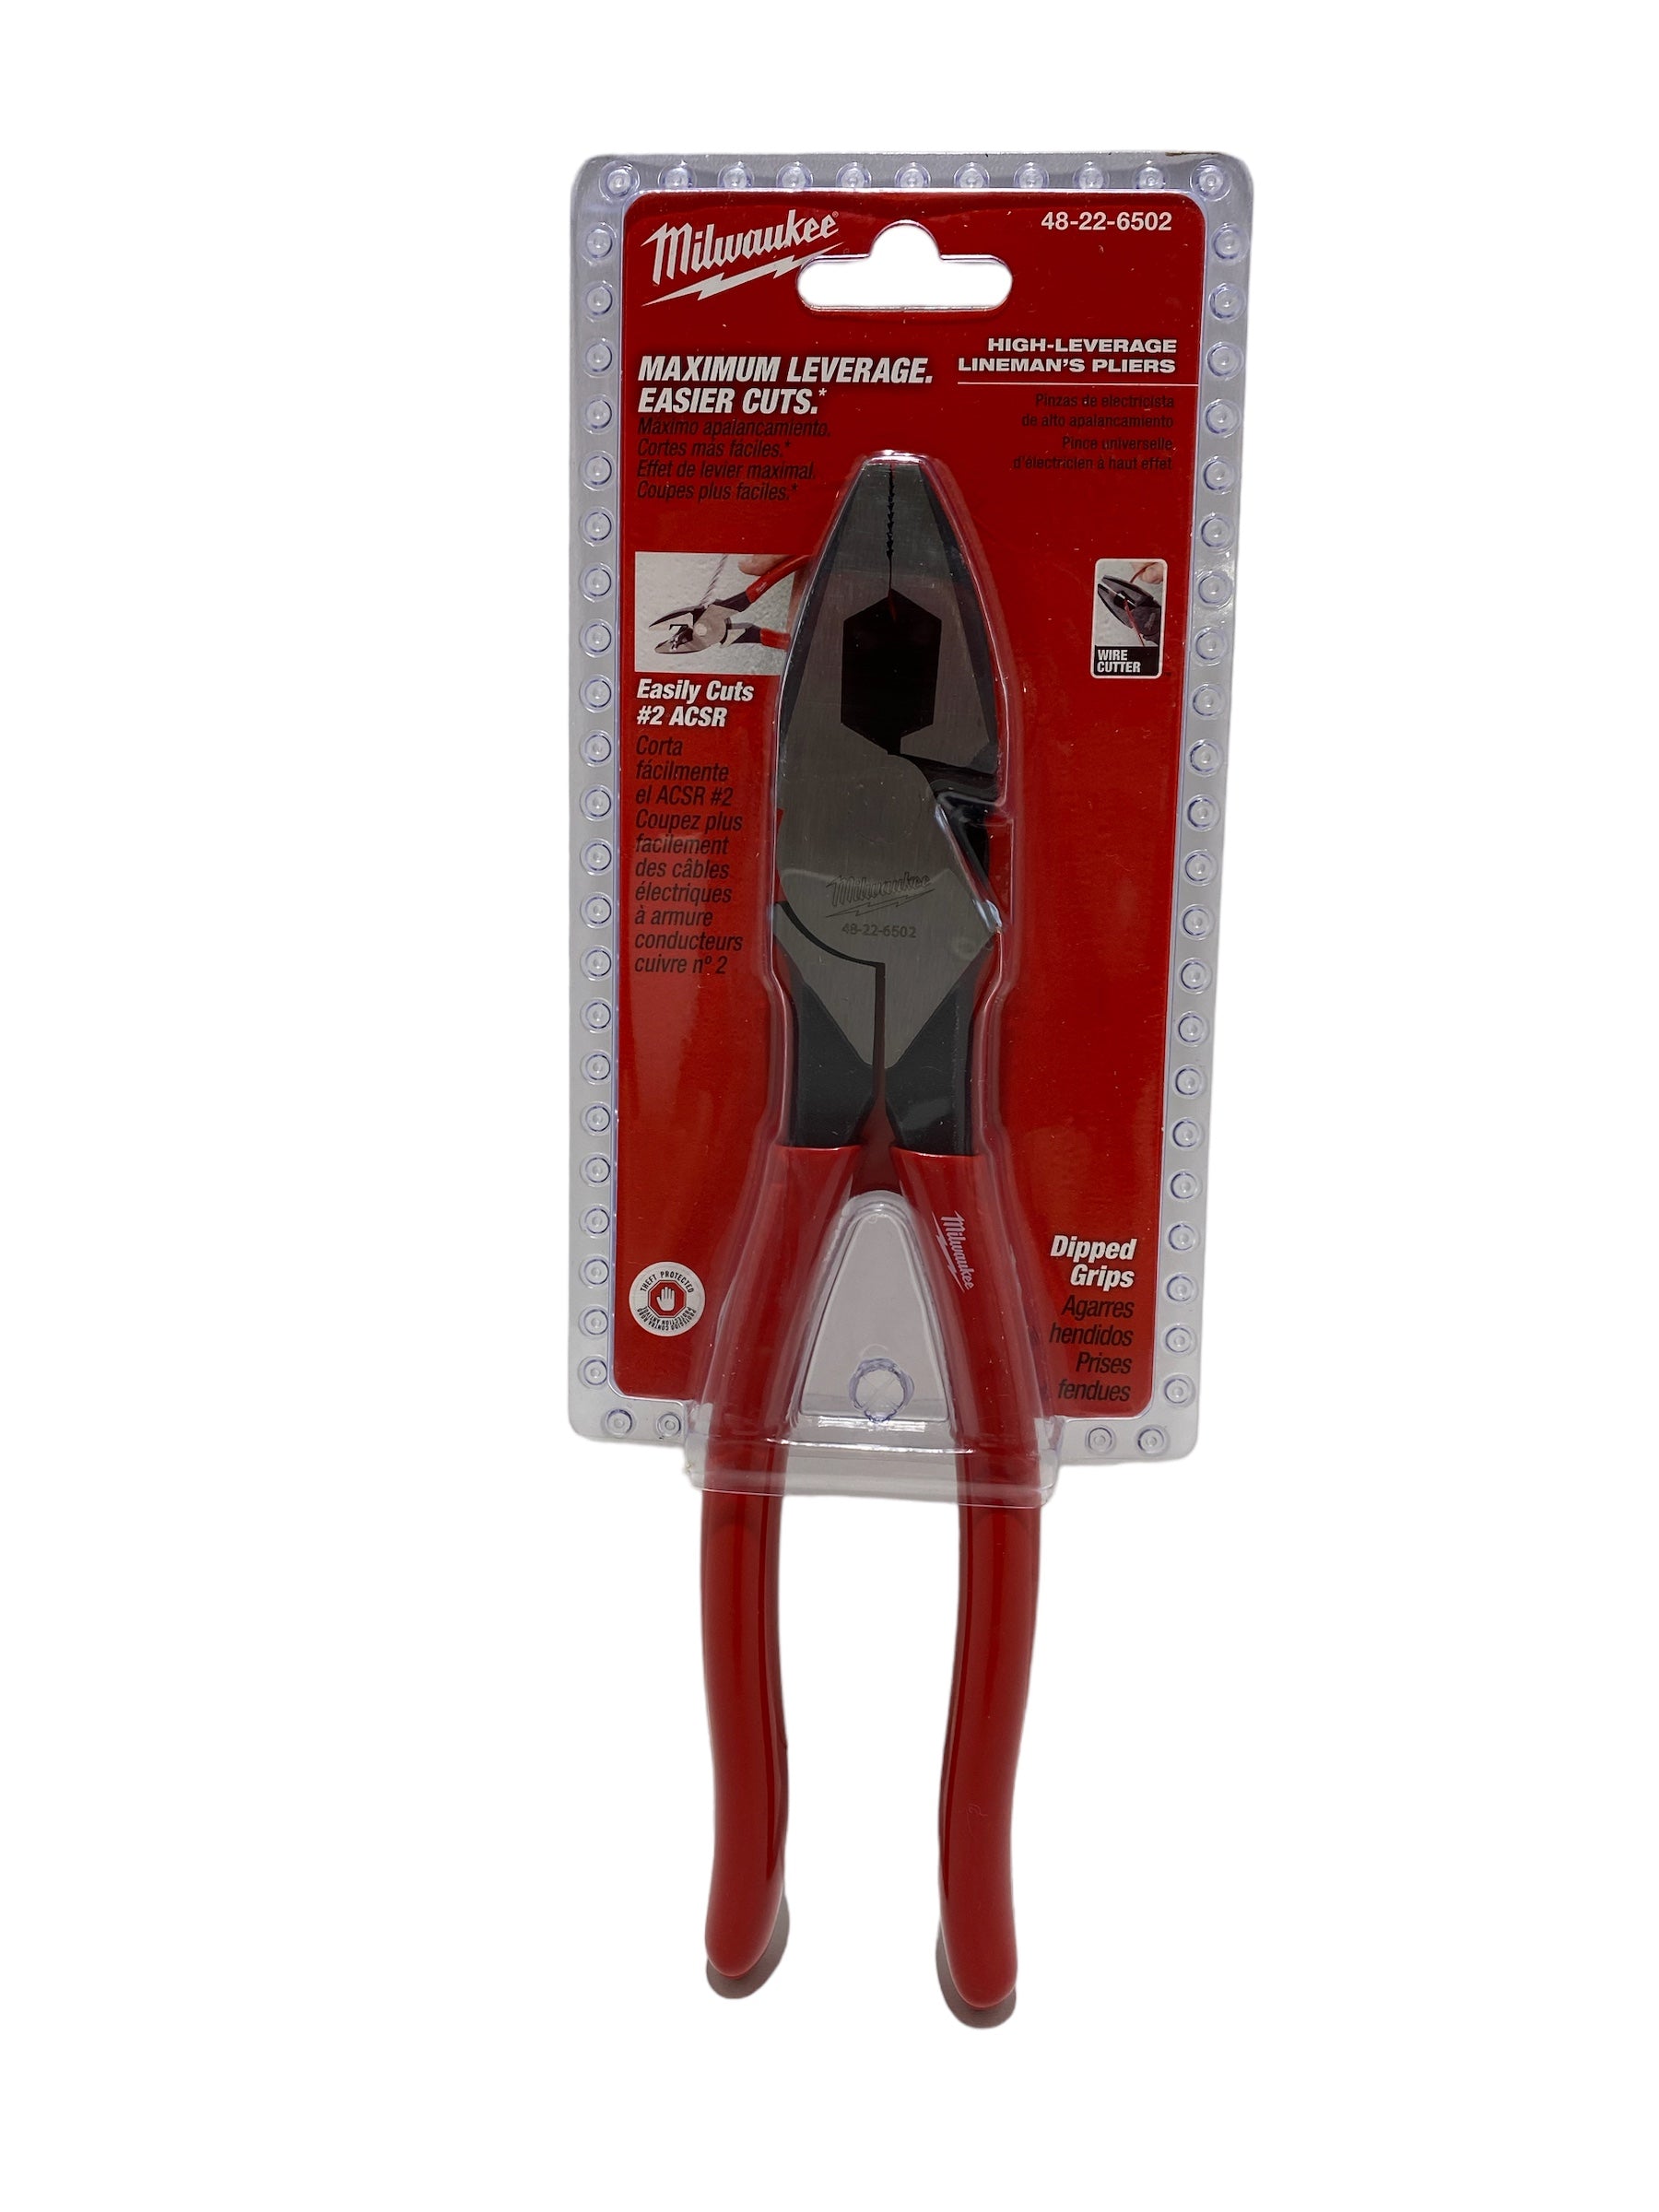 Milwaukee Maximum Leverage Easier Cuts, Dipped Grips Wire Cutter 48-22-6502